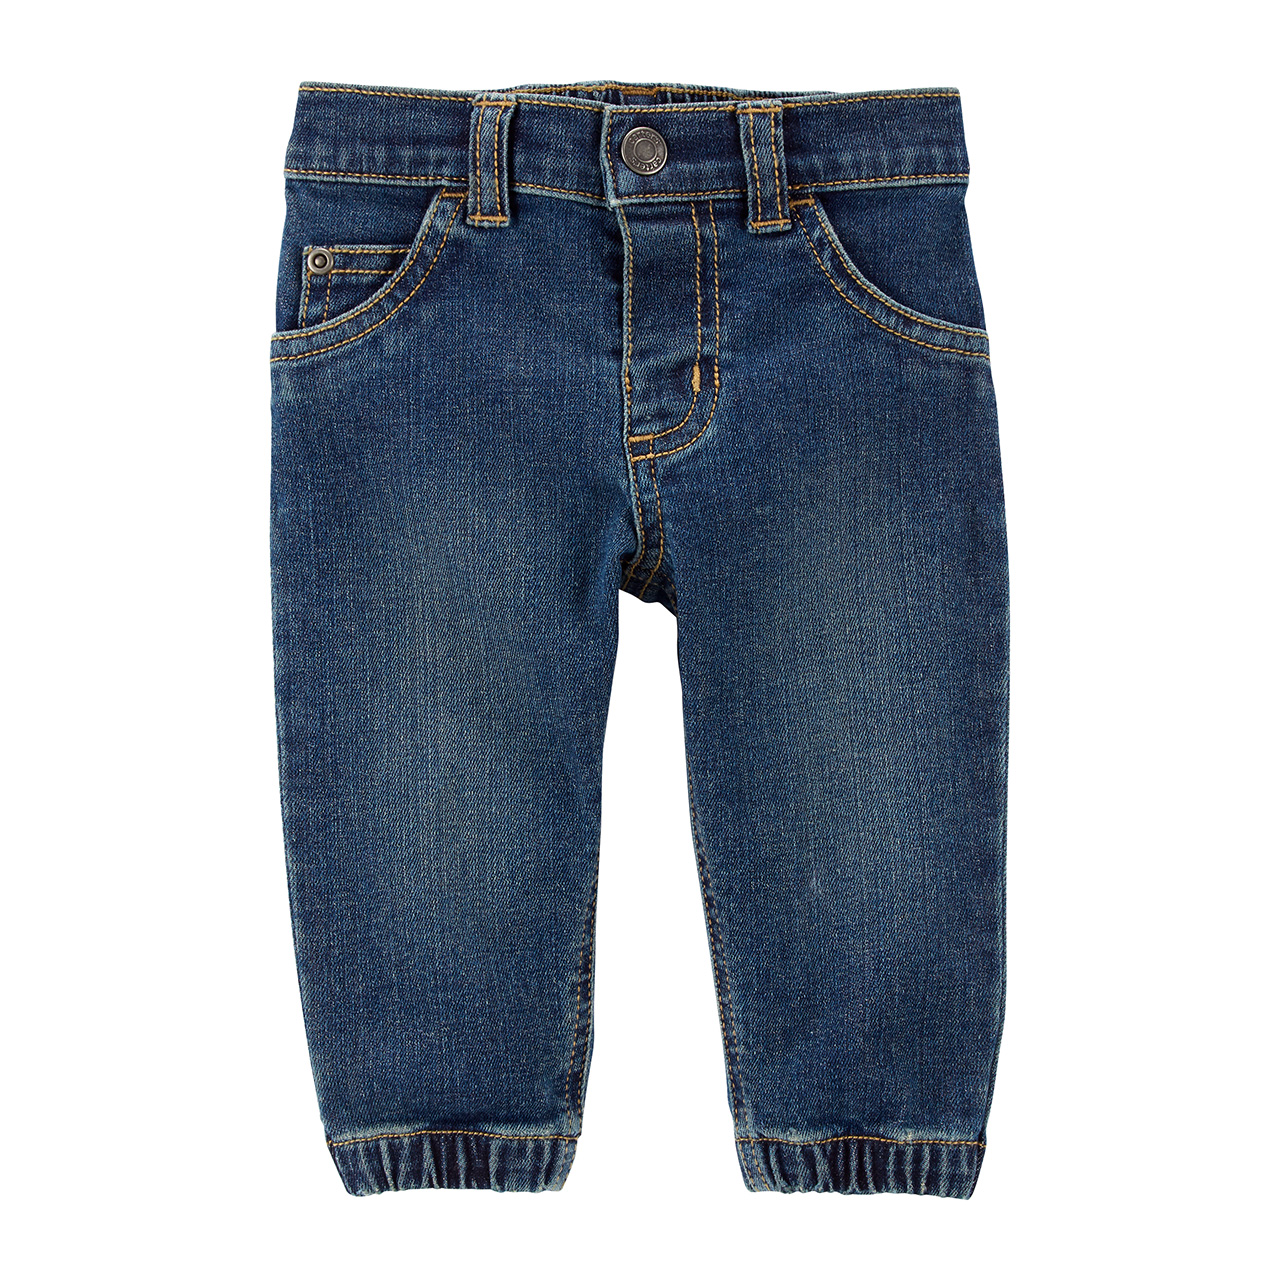 A pair of jeans for babies.